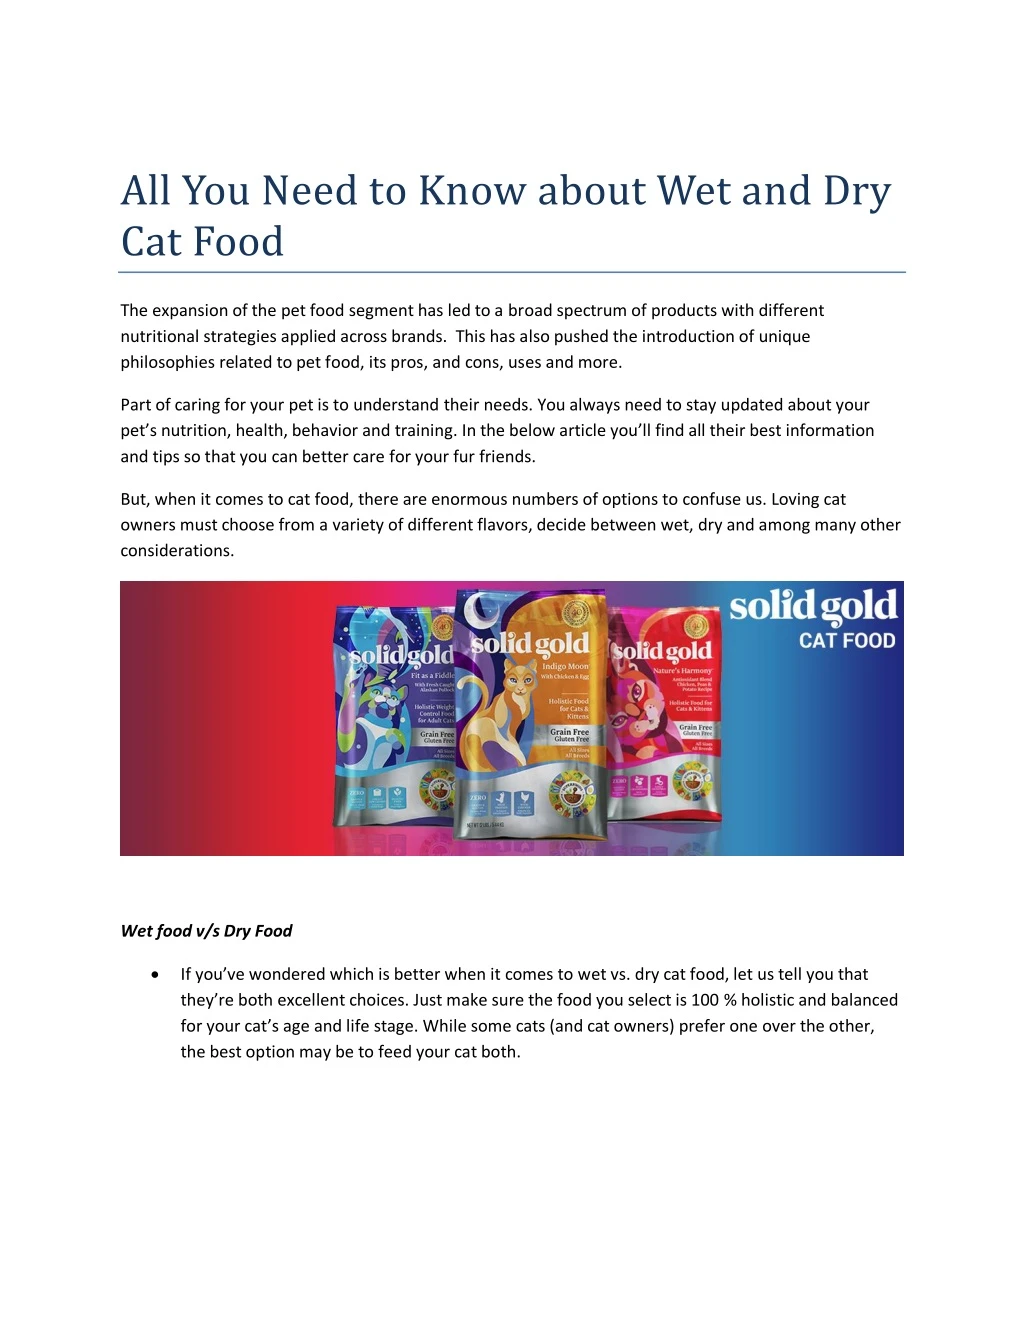 all you need to know about wet and dry cat food